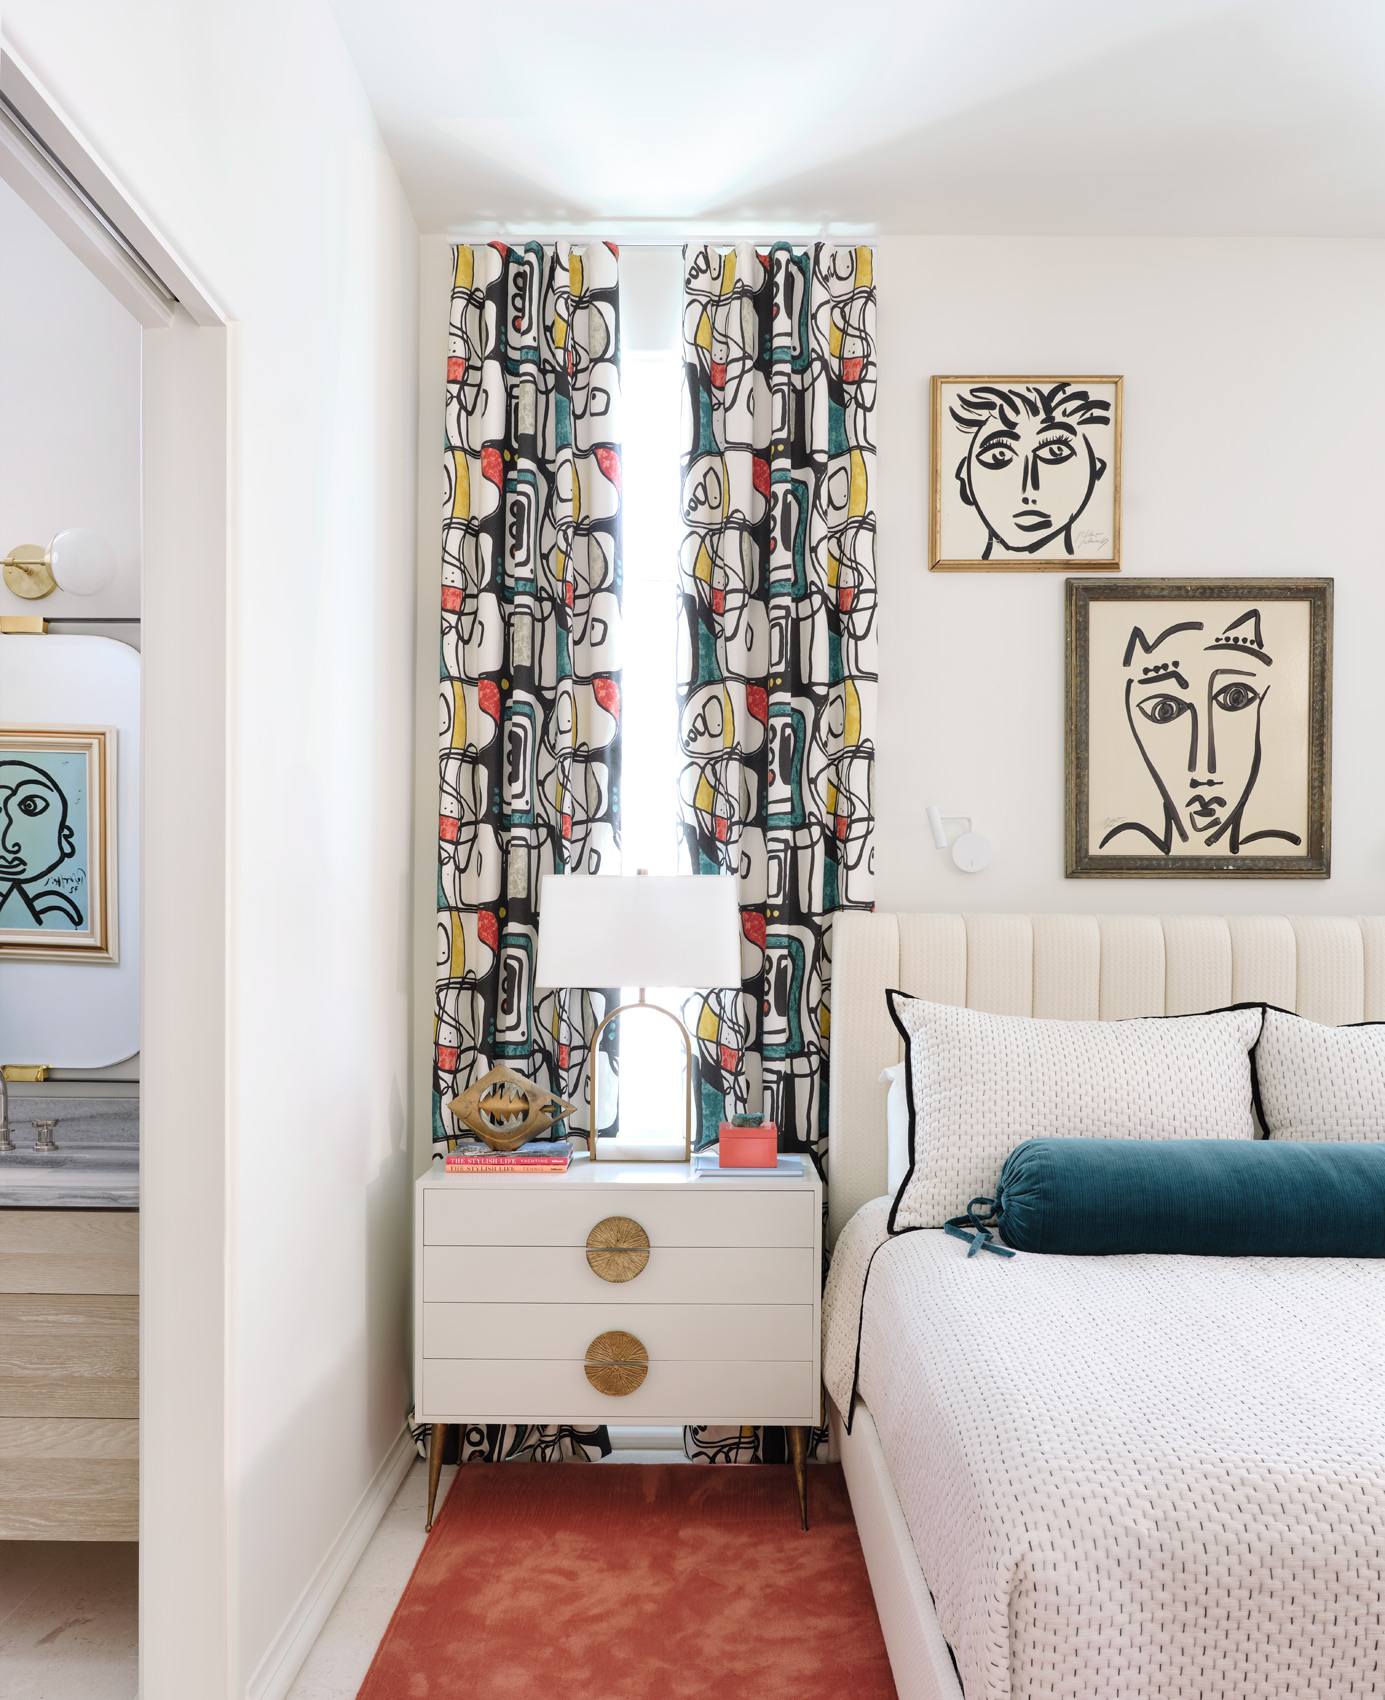 Sixties inspired guest room by Melanie Turner Interiors, photo by Mali Azima. 